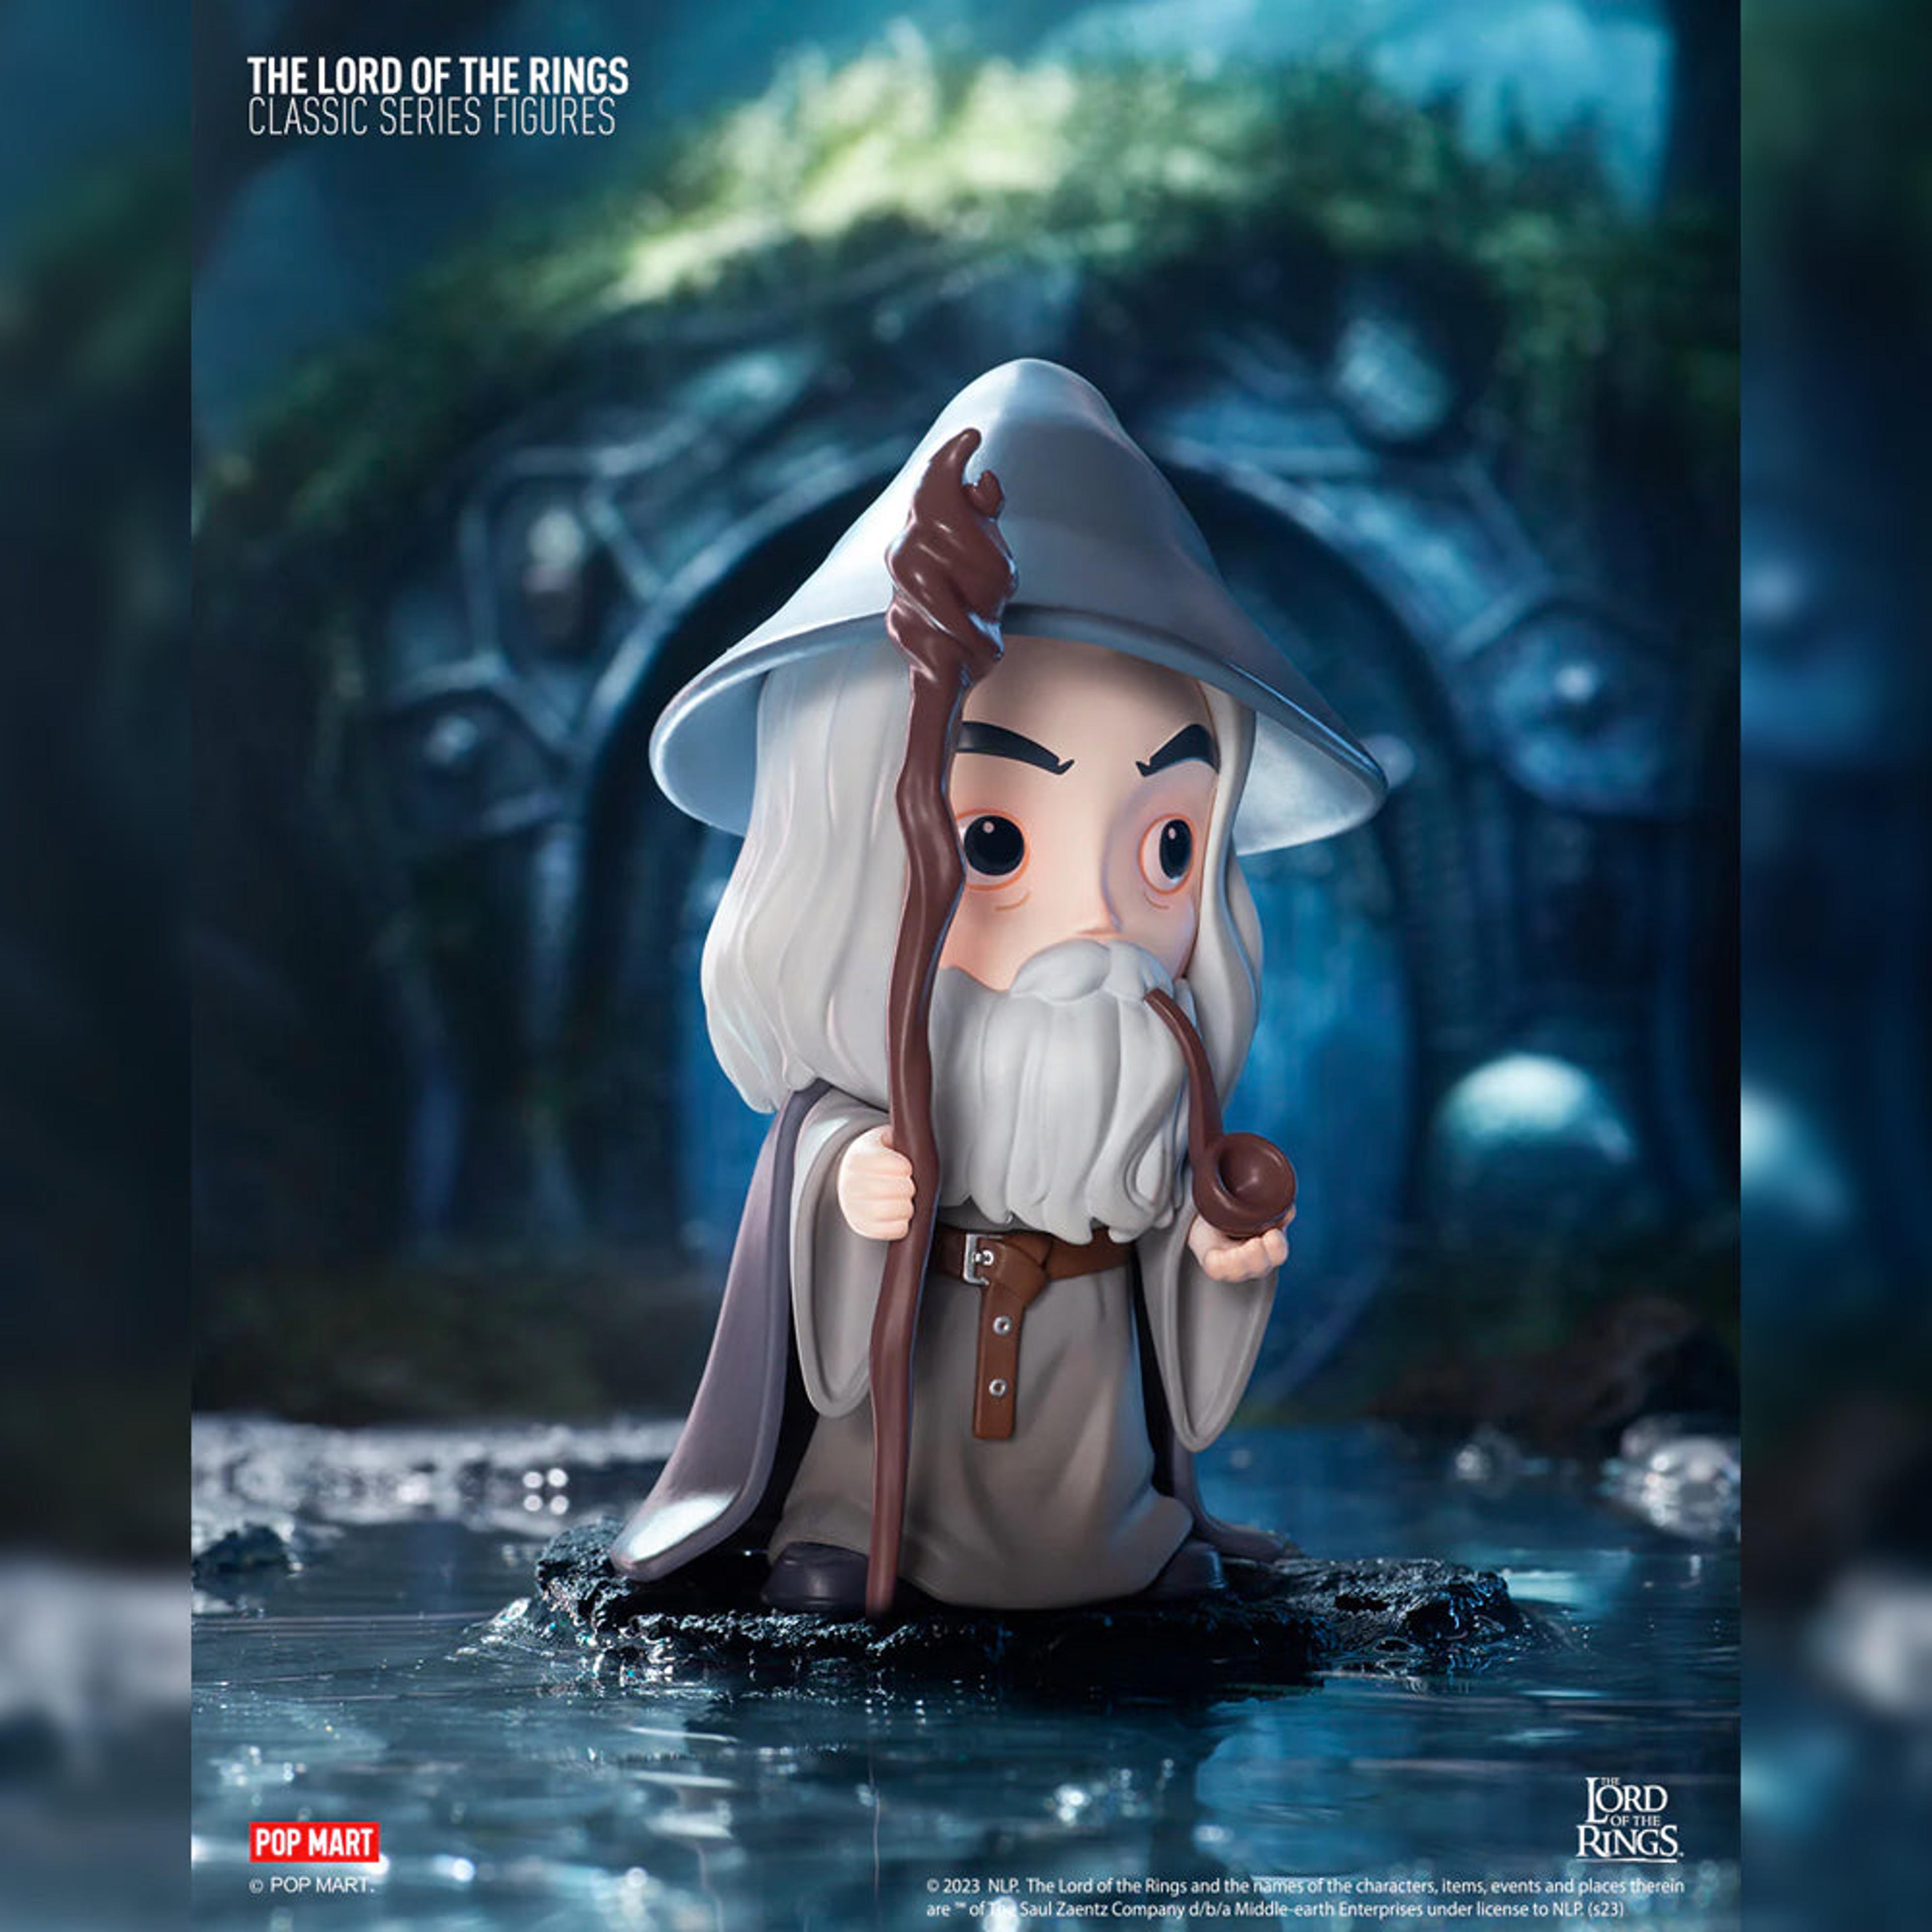 Alternate View 6 of The Lord of the Rings Classic Series Blind Box by POP MART